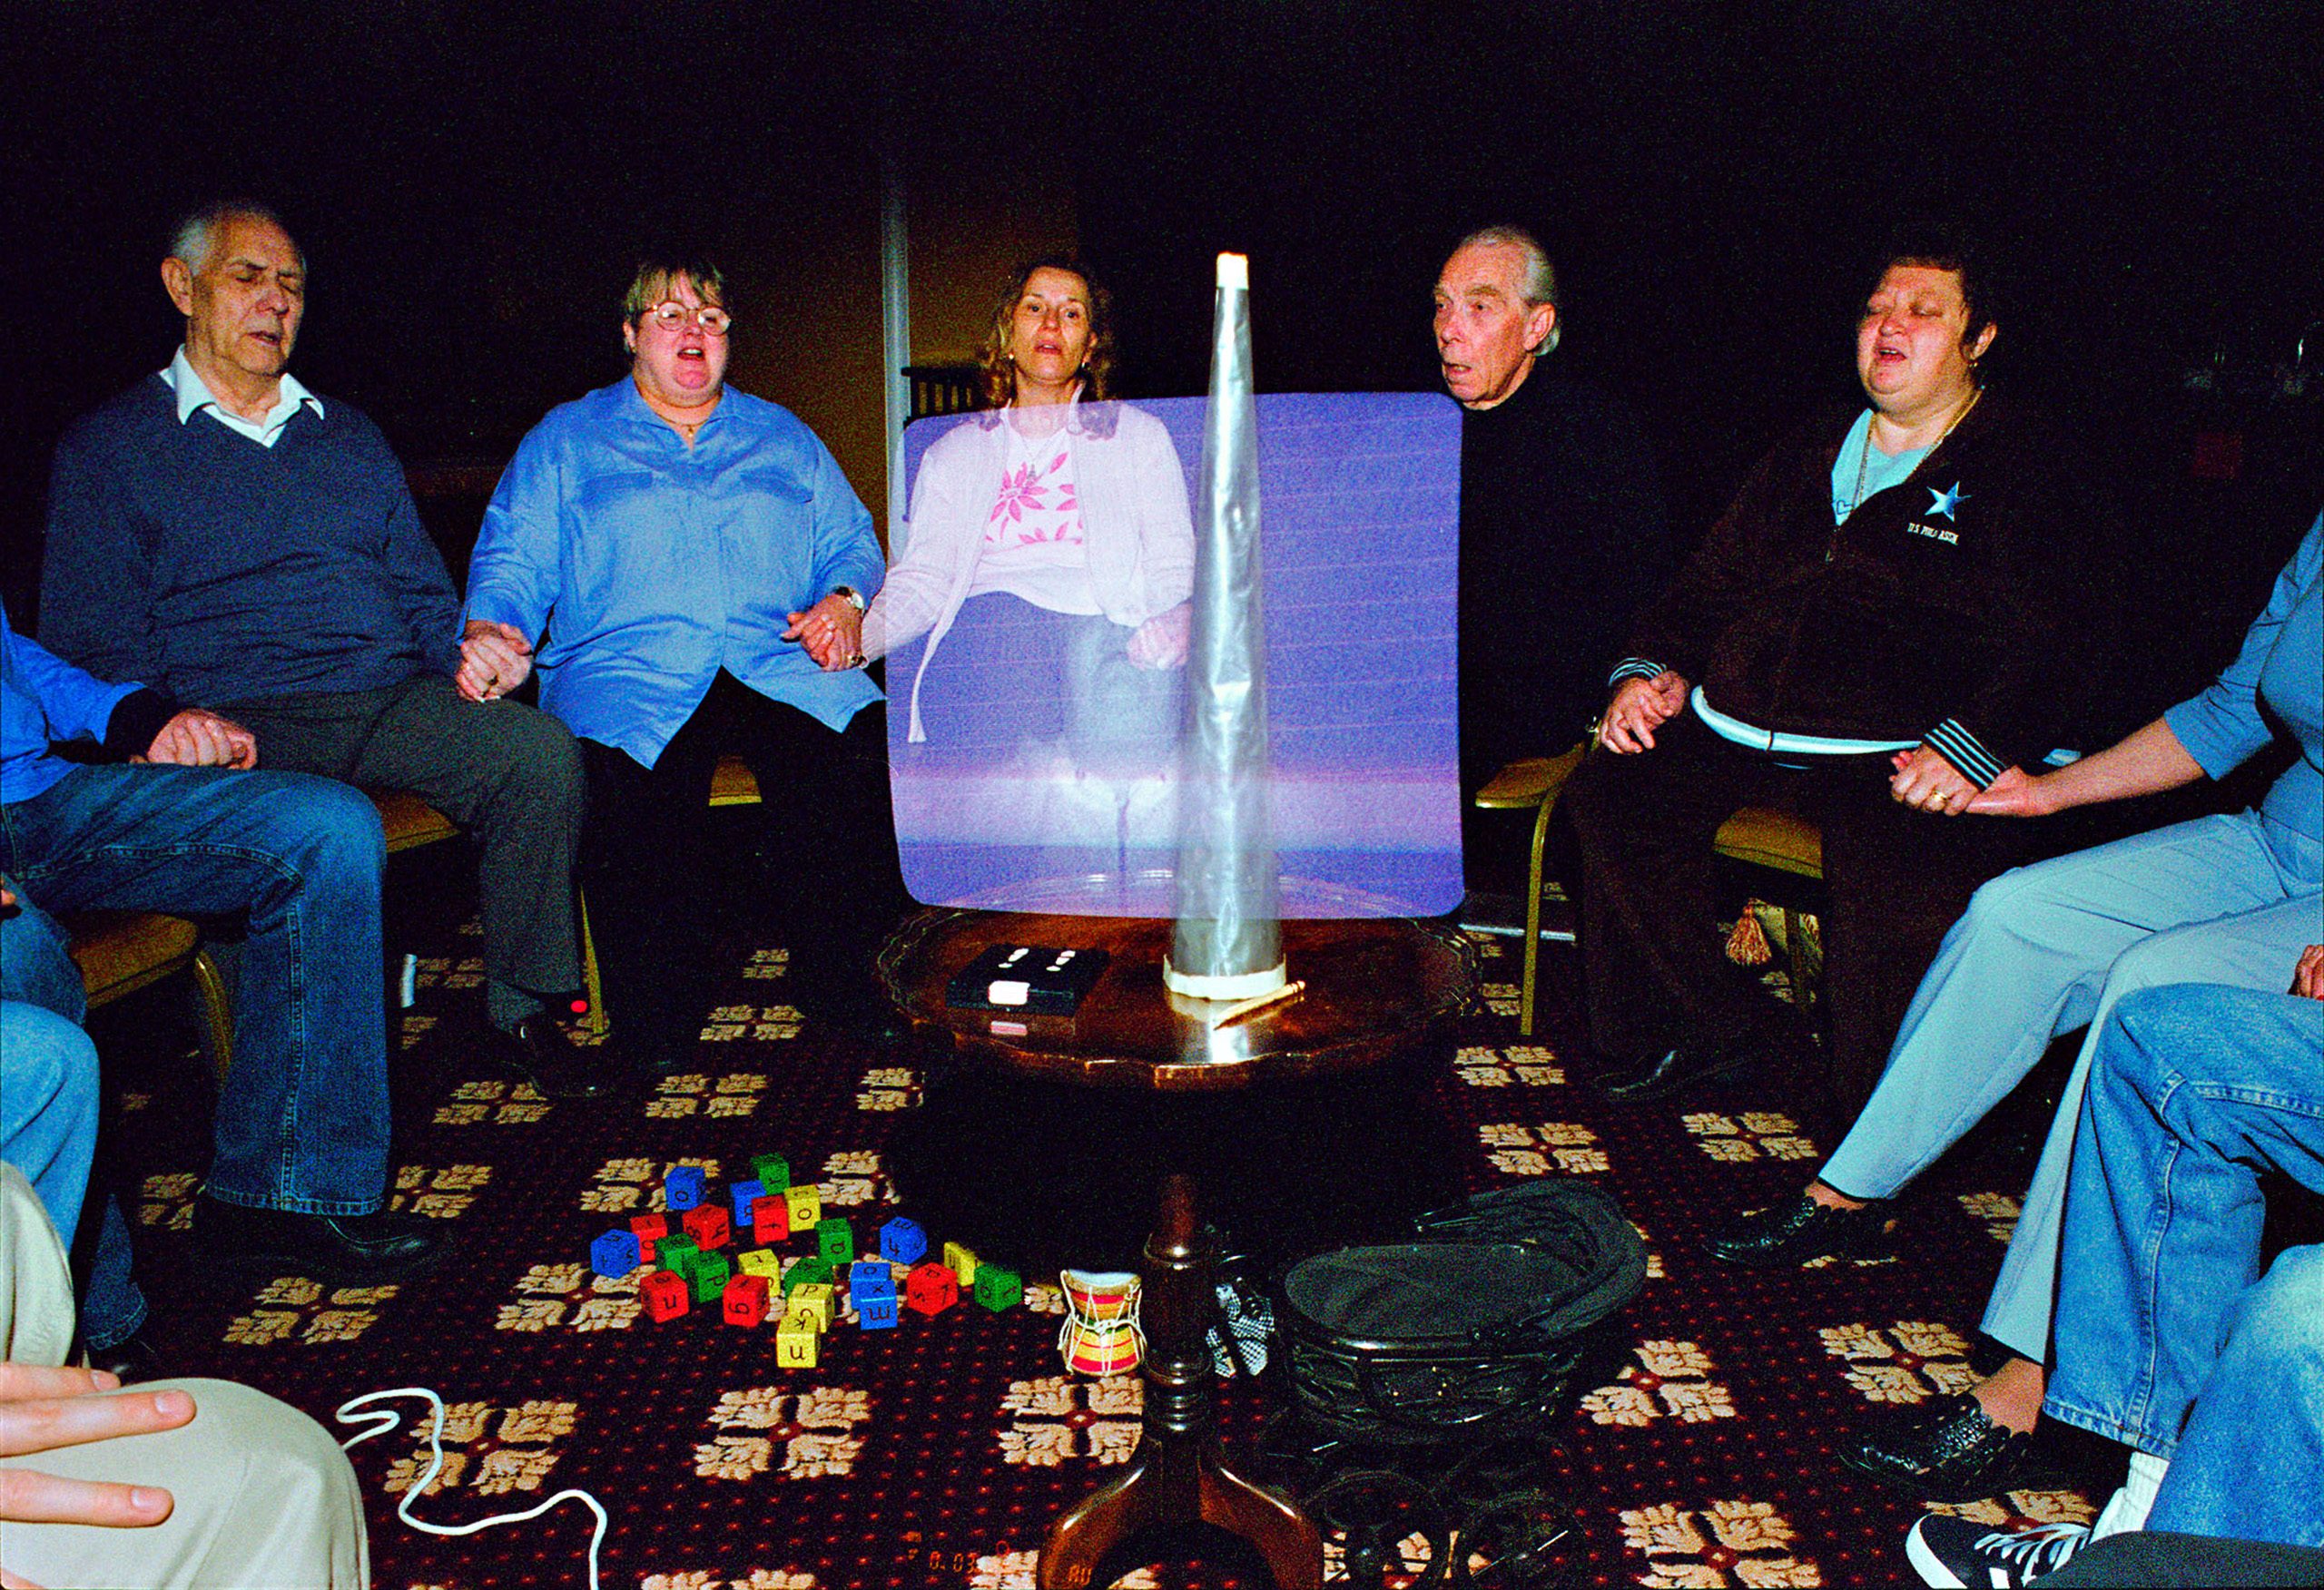 Asking the child spirits to move the toys, physical mediumship class, Stansted, England, 2003.